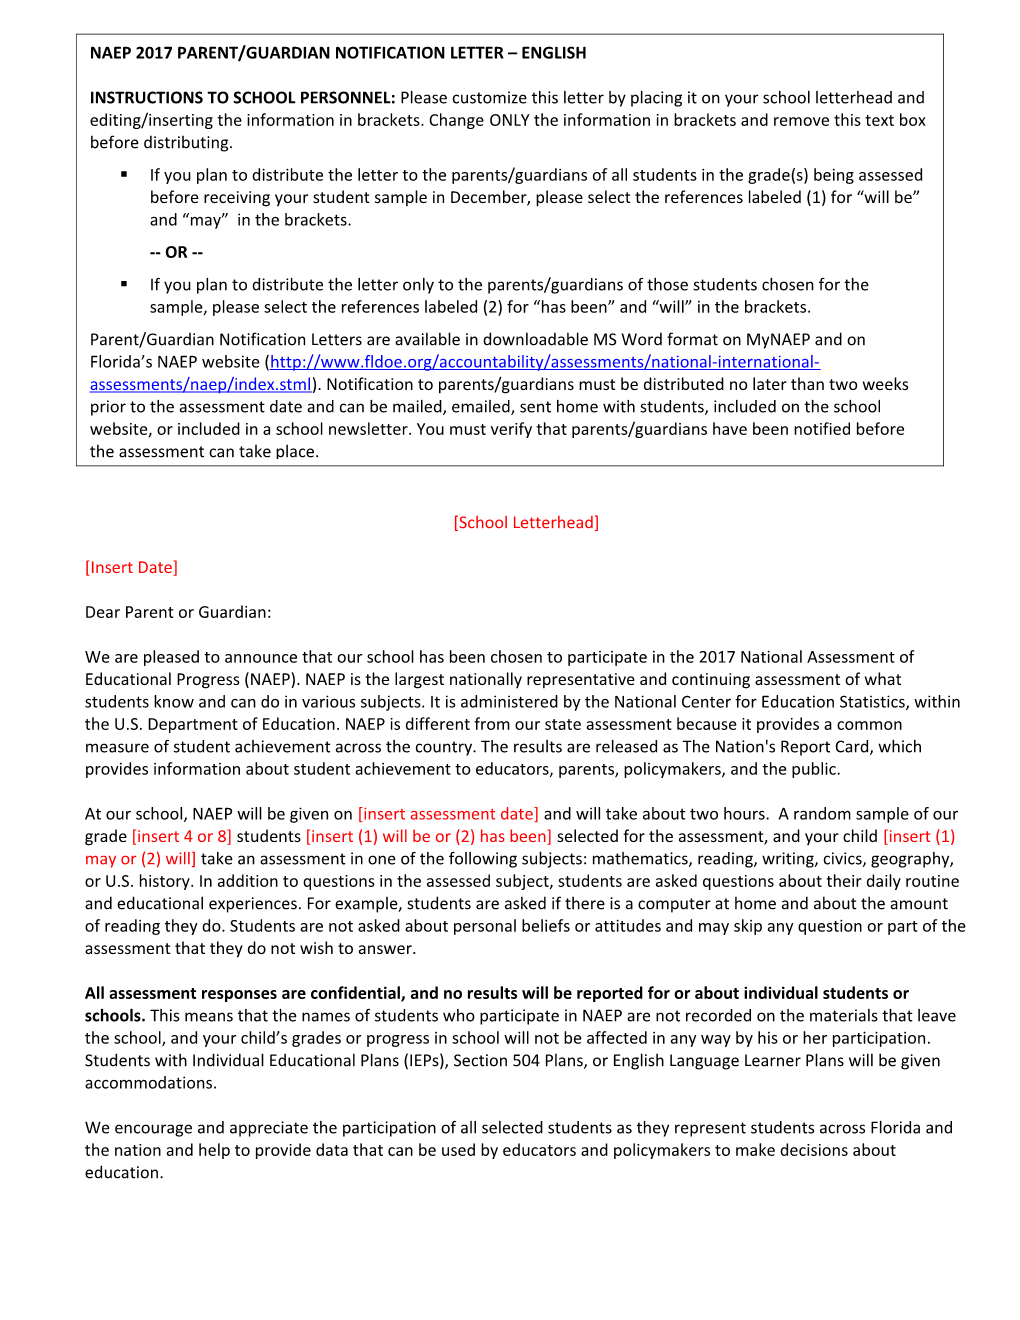 Parent Notification Letter - Mathematics and Reading Assessments (*, 8/18/2016)